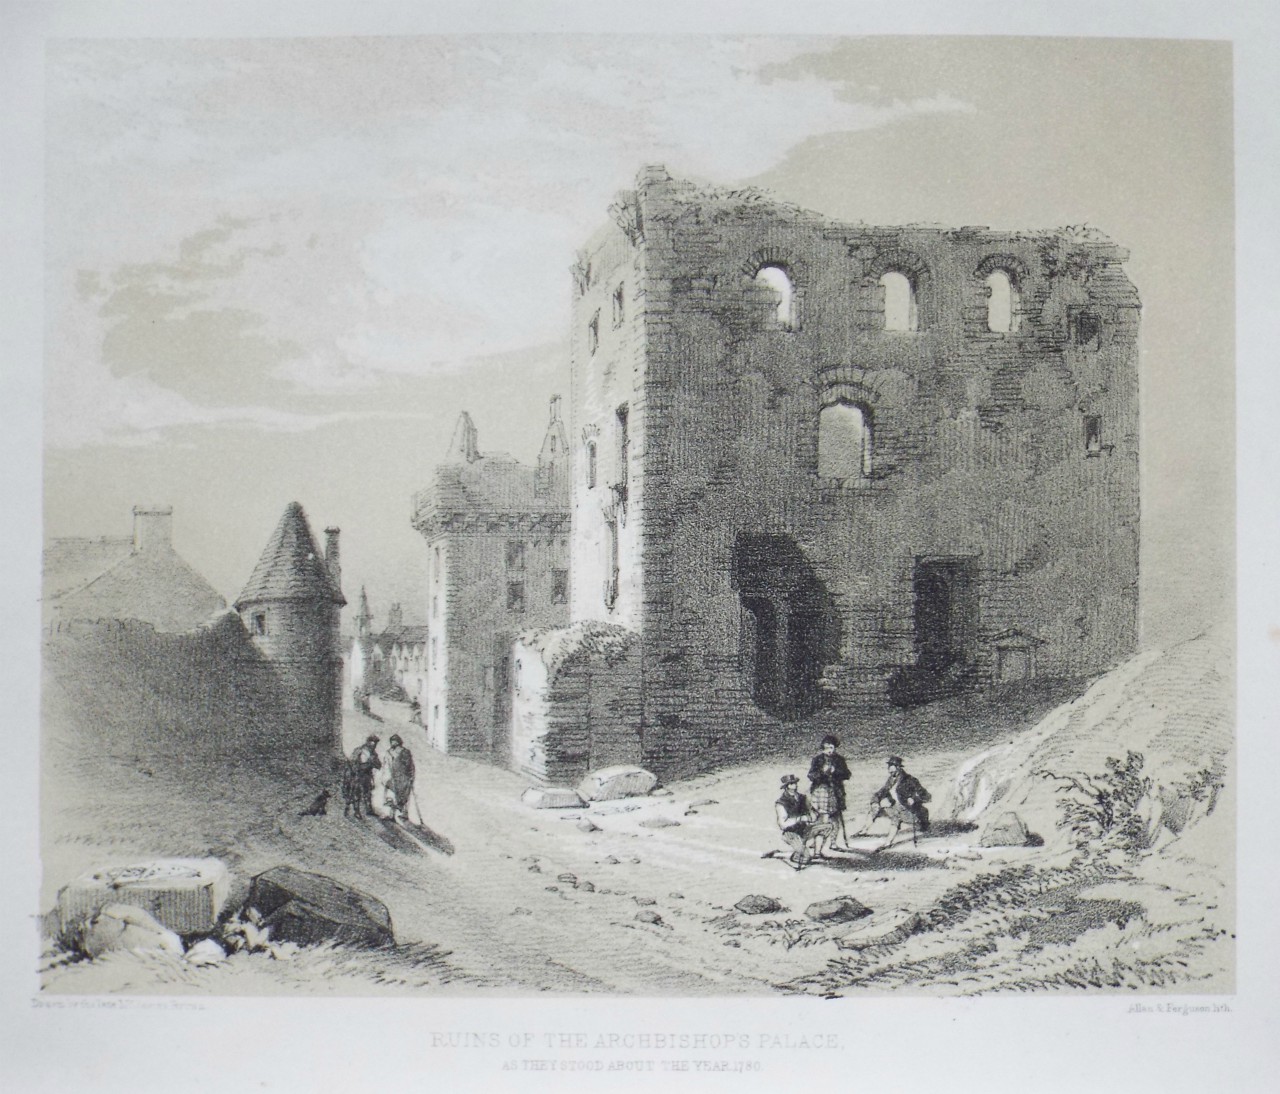 Lithograph - Ruins of the Archbishop's Palace, as they stood about the year 1780. - Allan